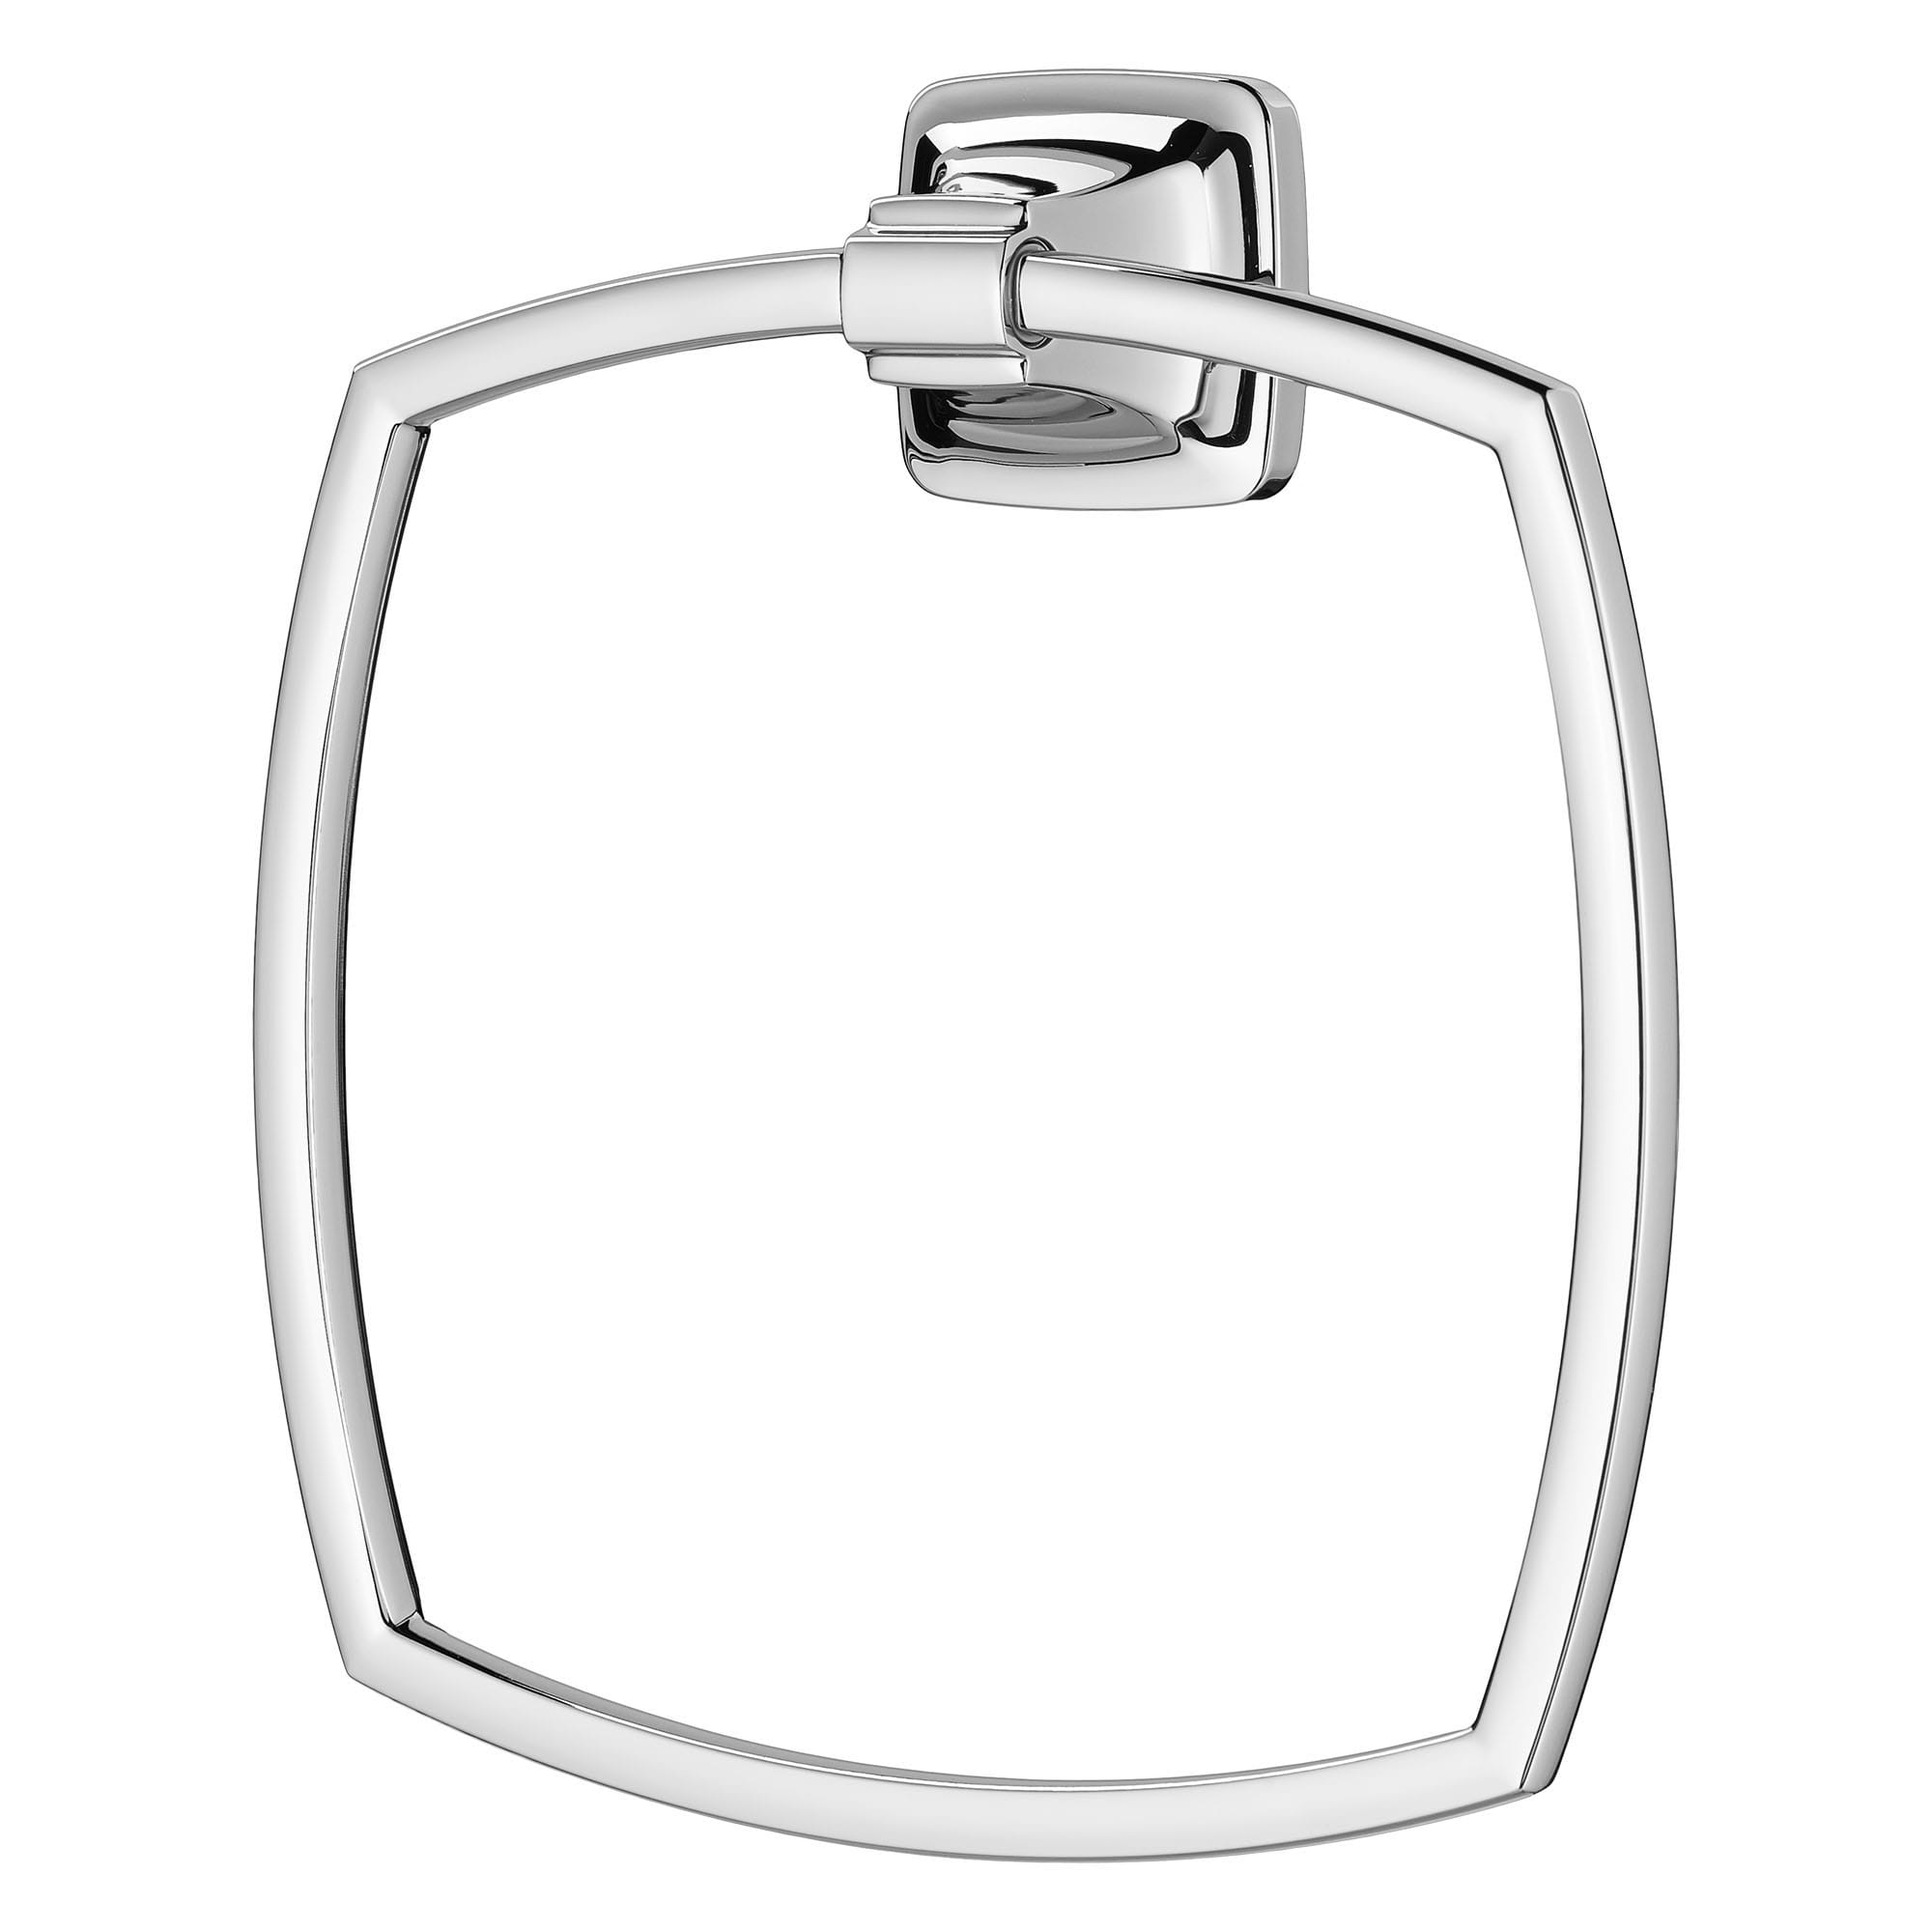 Townsend Towel Ring CHROME